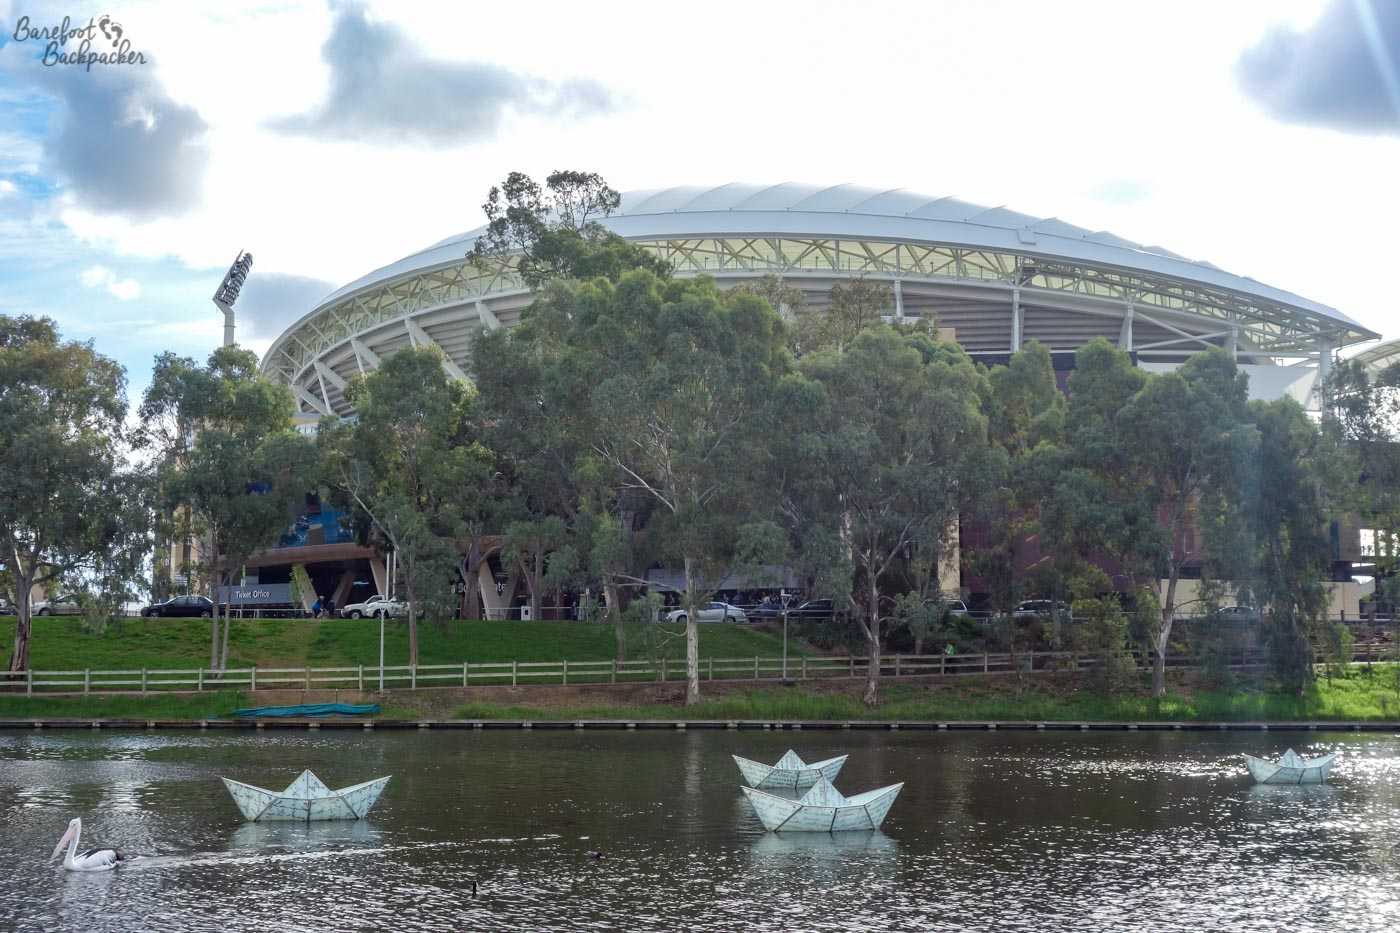 The Adelaide Oval cricket and AFL ground, as seen from the opposite side of the river. It's round, with a kind of raised roof that makes it look not a little like a parked alien spaceship.